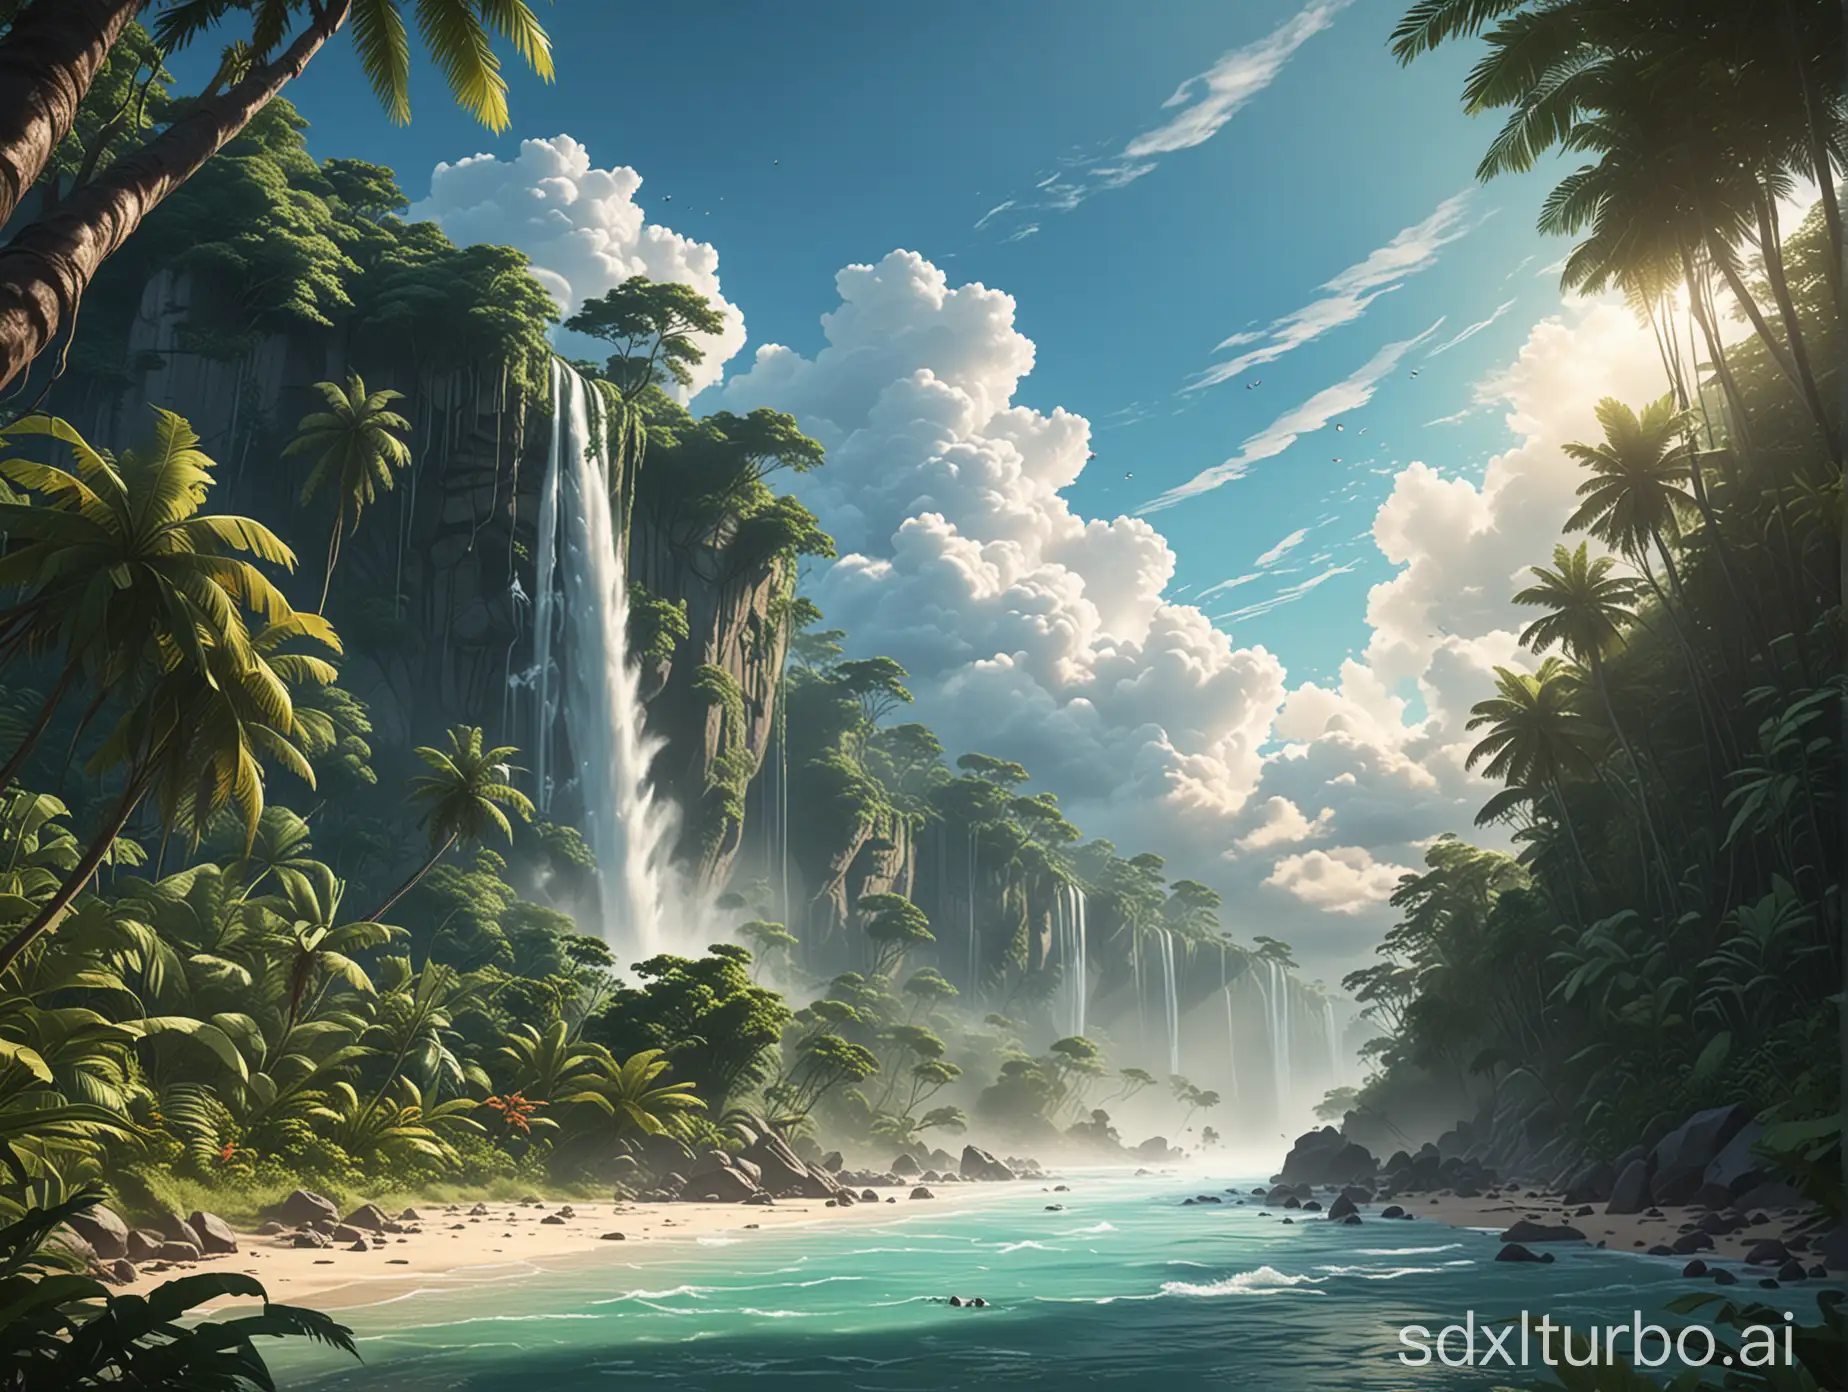 Cinematic-Anime-Illustration-of-Jungle-and-Beach-with-Vapor-Trails-and-Clouds